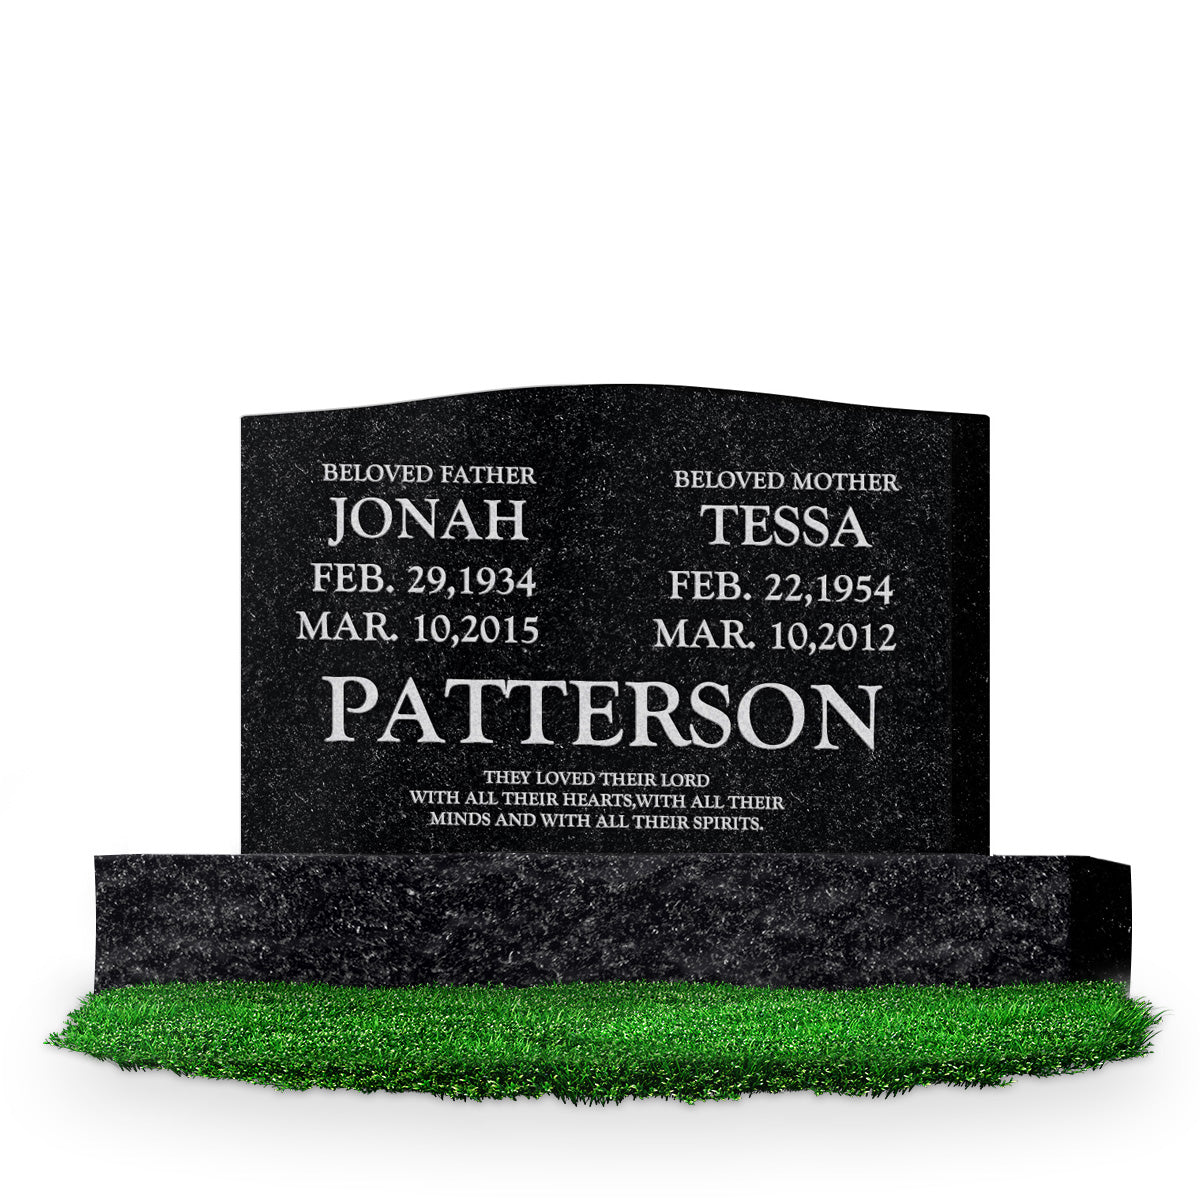 36″ x 6″ x 24″ Serp Top Upright Headstone: polished top, front and back; 48″ base; Companion/Text